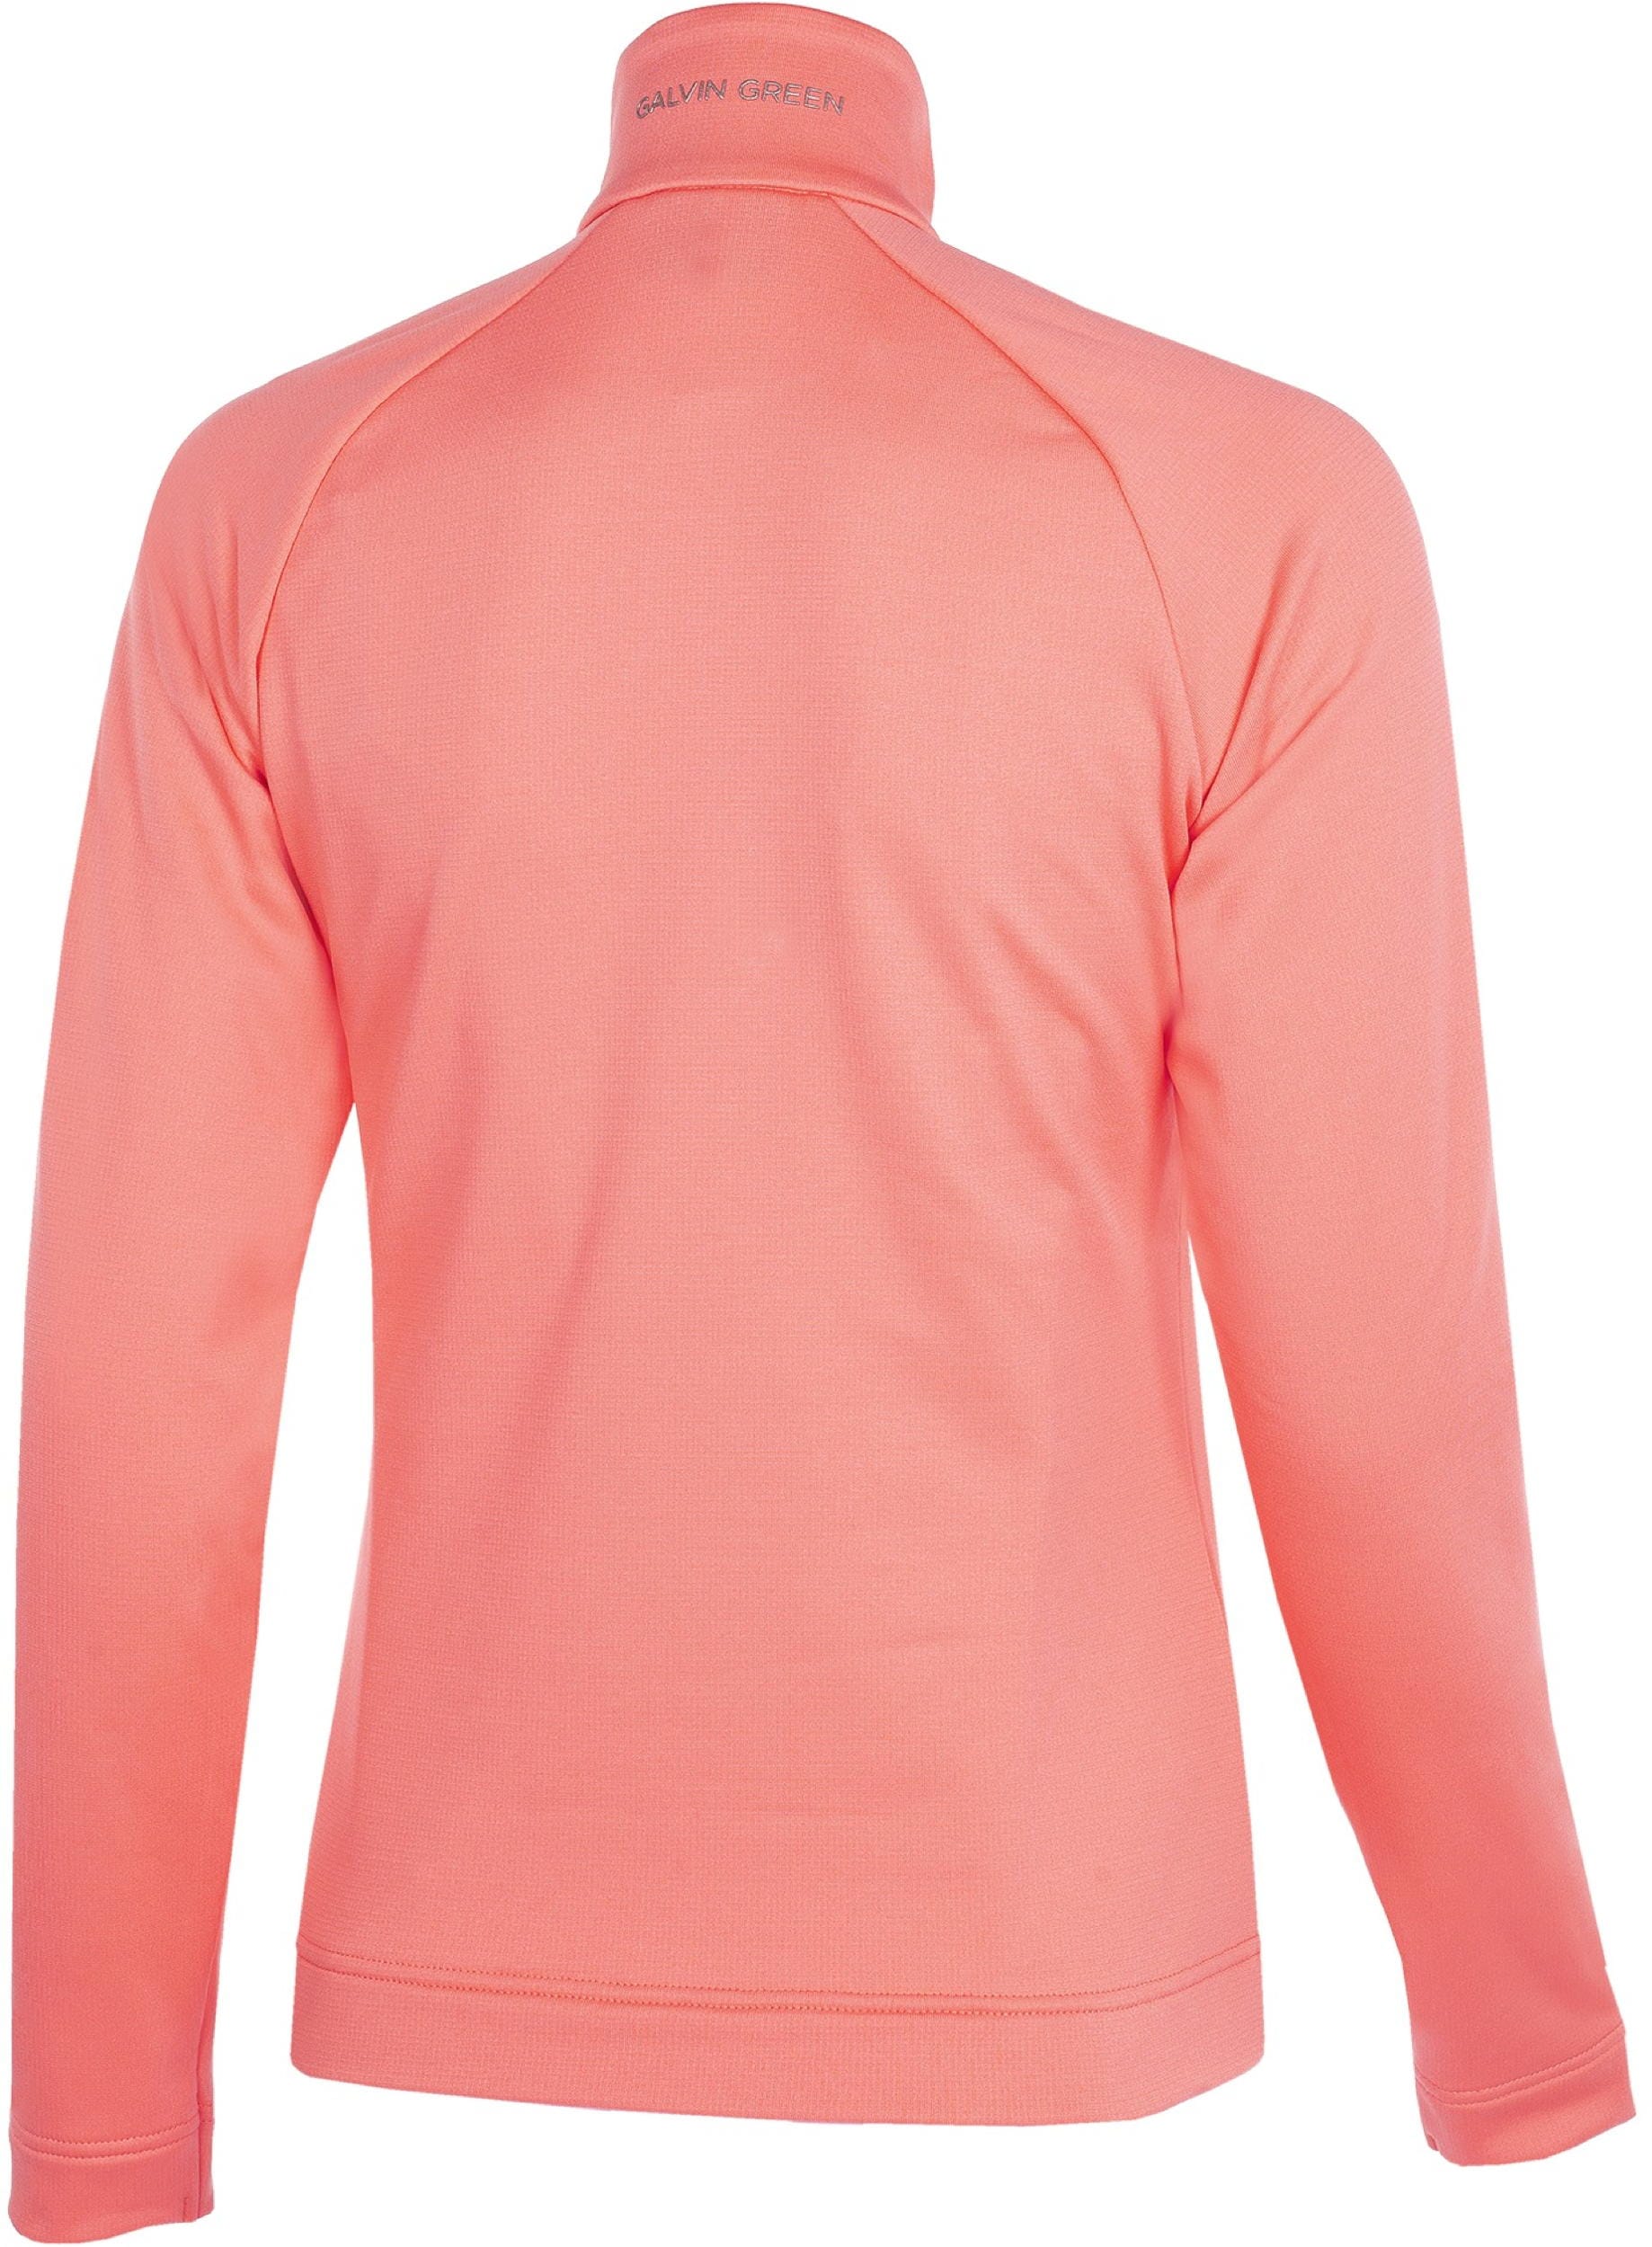 Galvin Green Dolly Insula 1/2 Zip Midlayer, coral